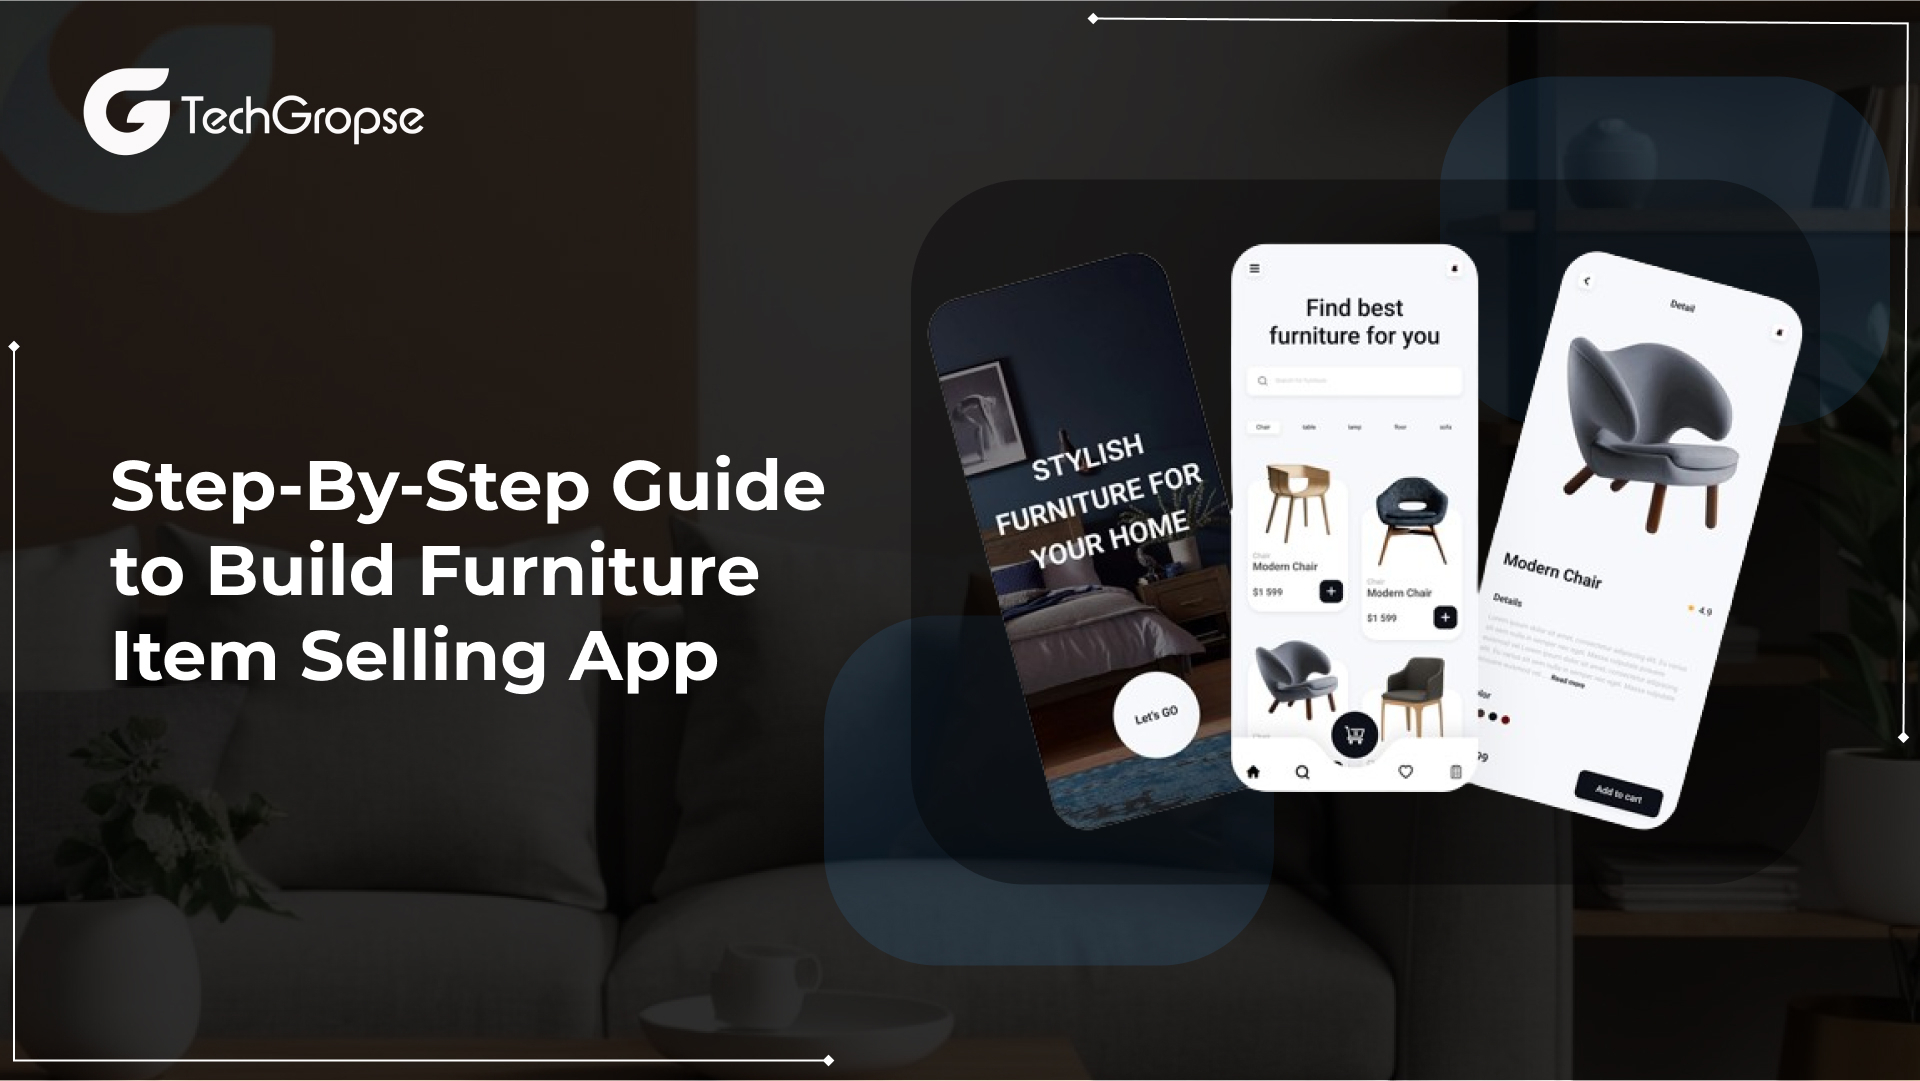 Step-By-Step Guide to Build Furniture Item Selling App